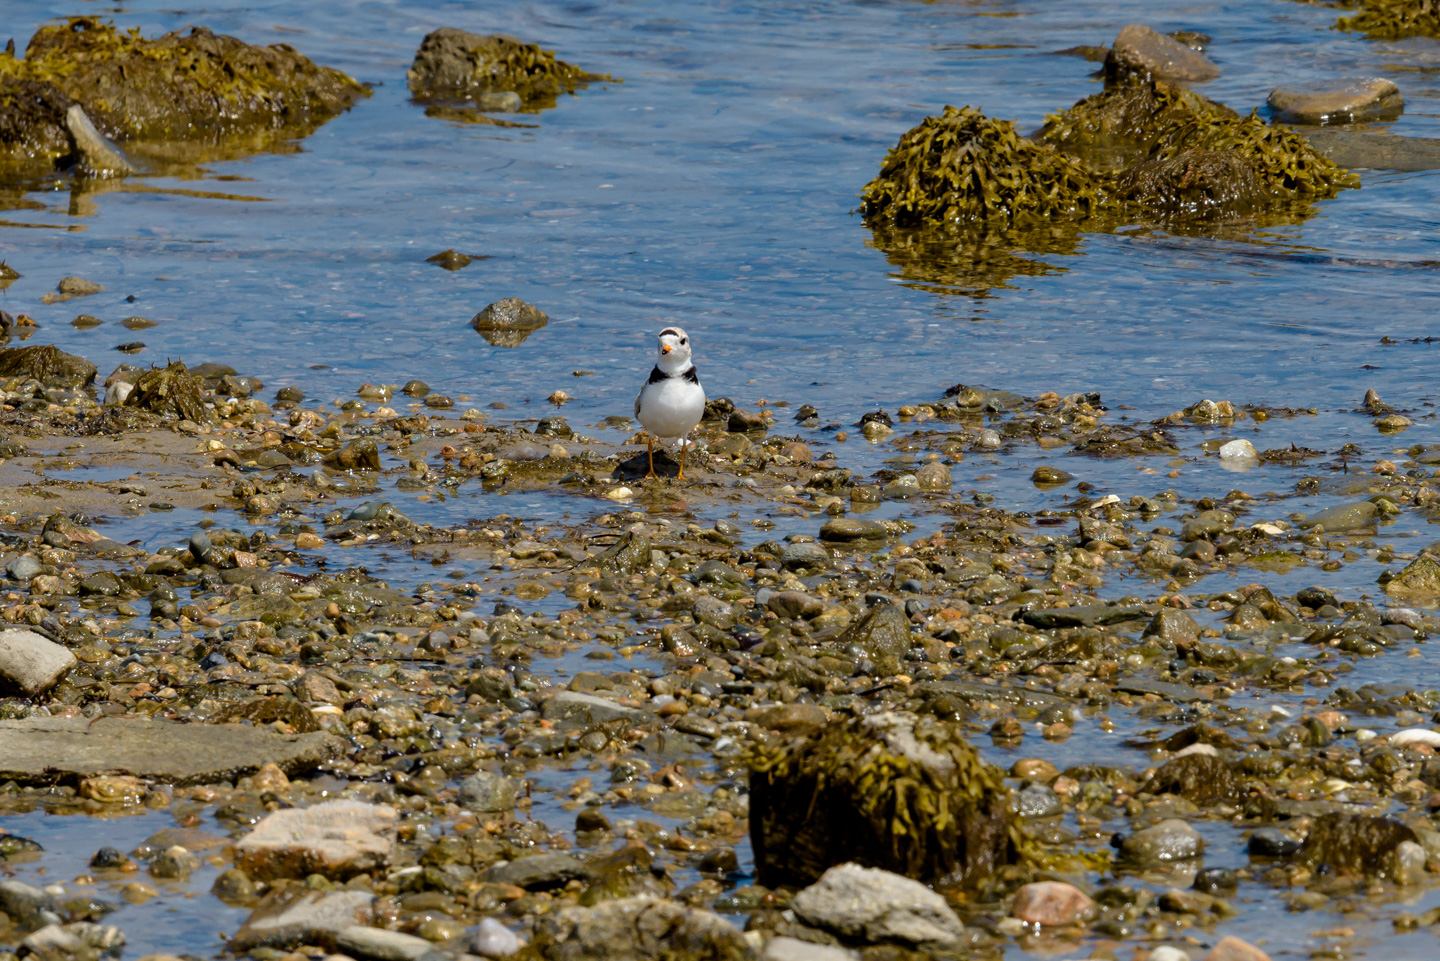 Piping Plover looking at the photographer